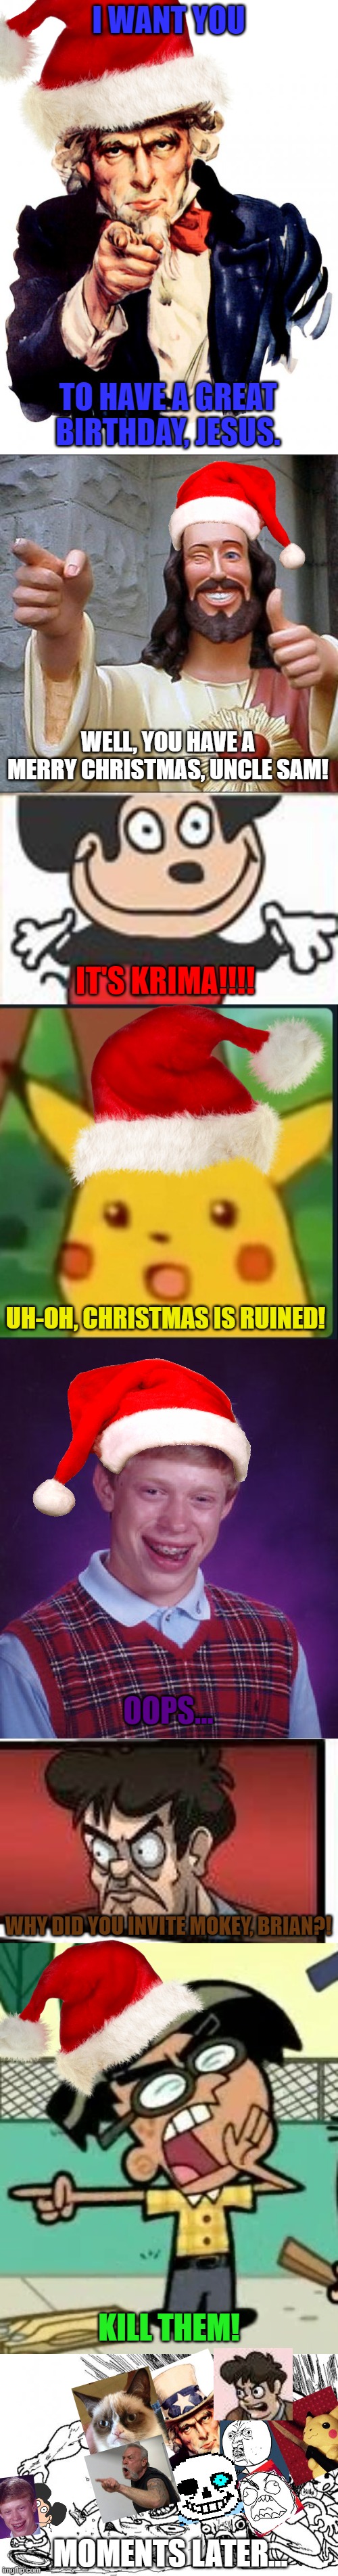 Christmas memes in a nutshell (It took a while, OK?!) |  I WANT YOU; TO HAVE A GREAT BIRTHDAY, JESUS. WELL, YOU HAVE A MERRY CHRISTMAS, UNCLE SAM! IT'S KRIMA!!!! UH-OH, CHRISTMAS IS RUINED! OOPS... WHY DID YOU INVITE MOKEY, BRIAN?! KILL THEM! MOMENTS LATER... | image tagged in memes,uncle sam,buddy christ,surprised pikachu,bad luck brian,boardroom meeting suggestion | made w/ Imgflip meme maker